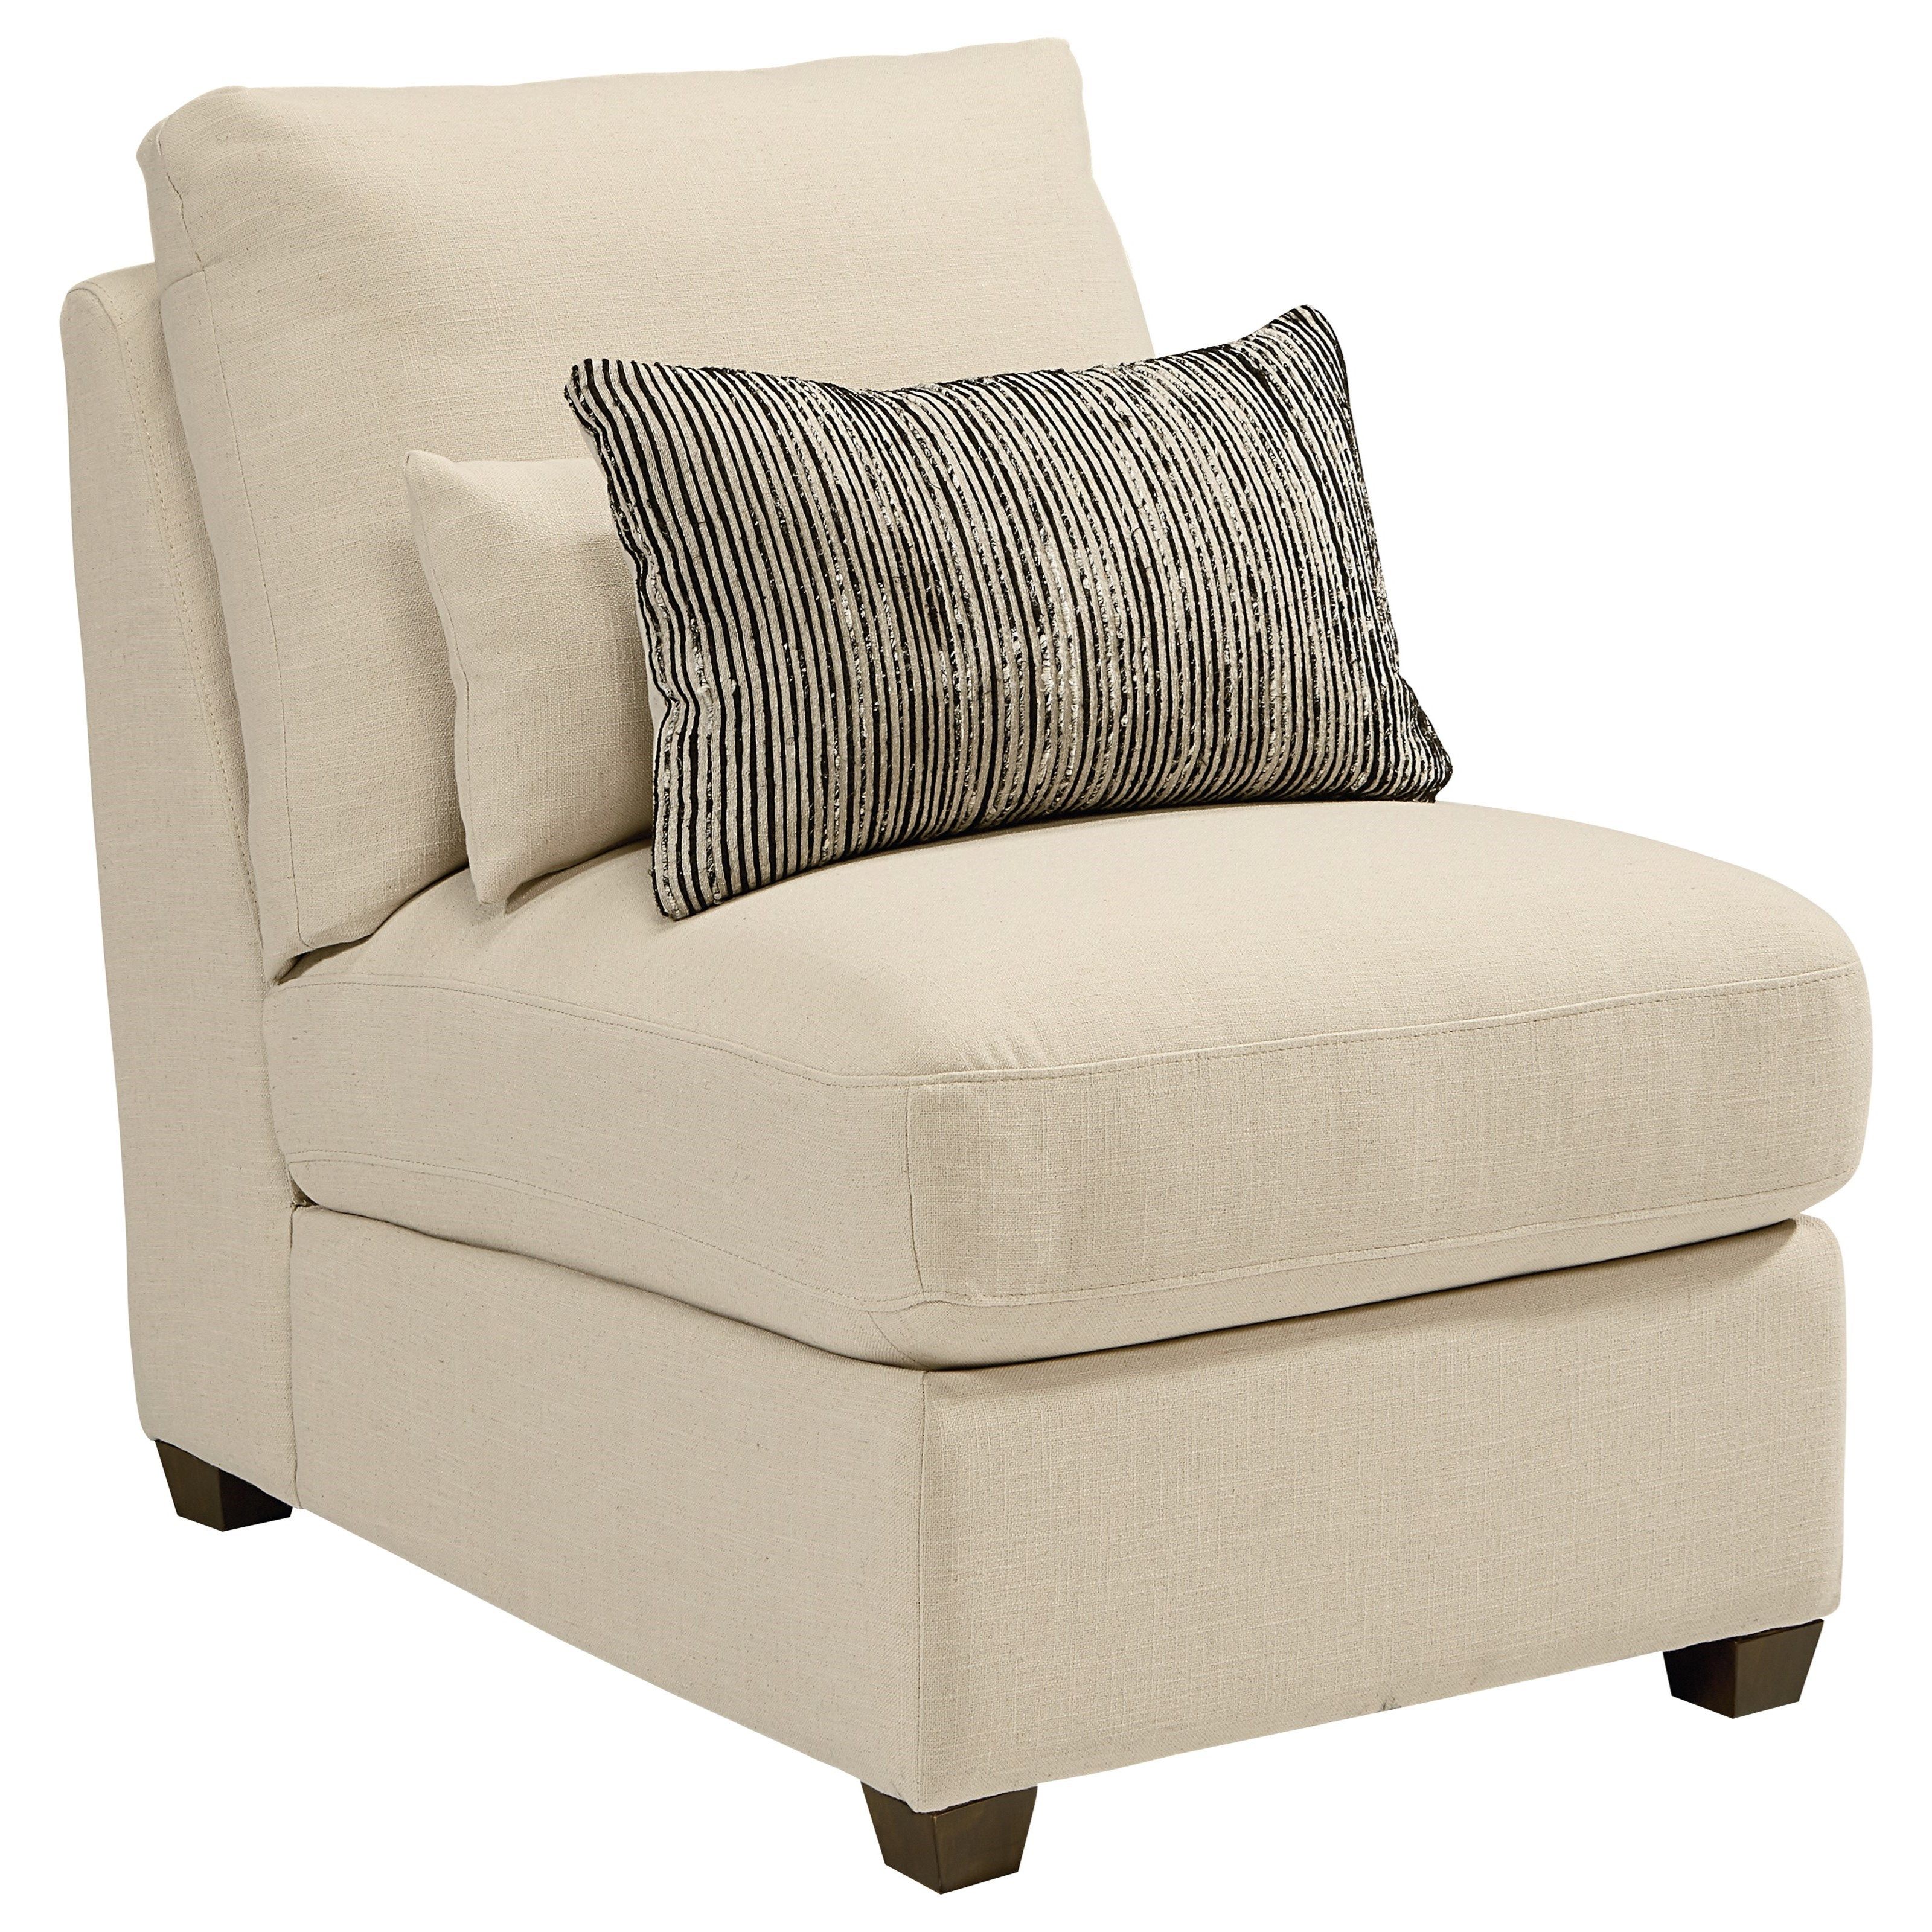 Magnolia Homejoanna Gaines Homestead 55505031 Armless Chair With Pertaining To Magnolia Home Homestead Sofa Chairs By Joanna Gaines (Photo 11 of 20)